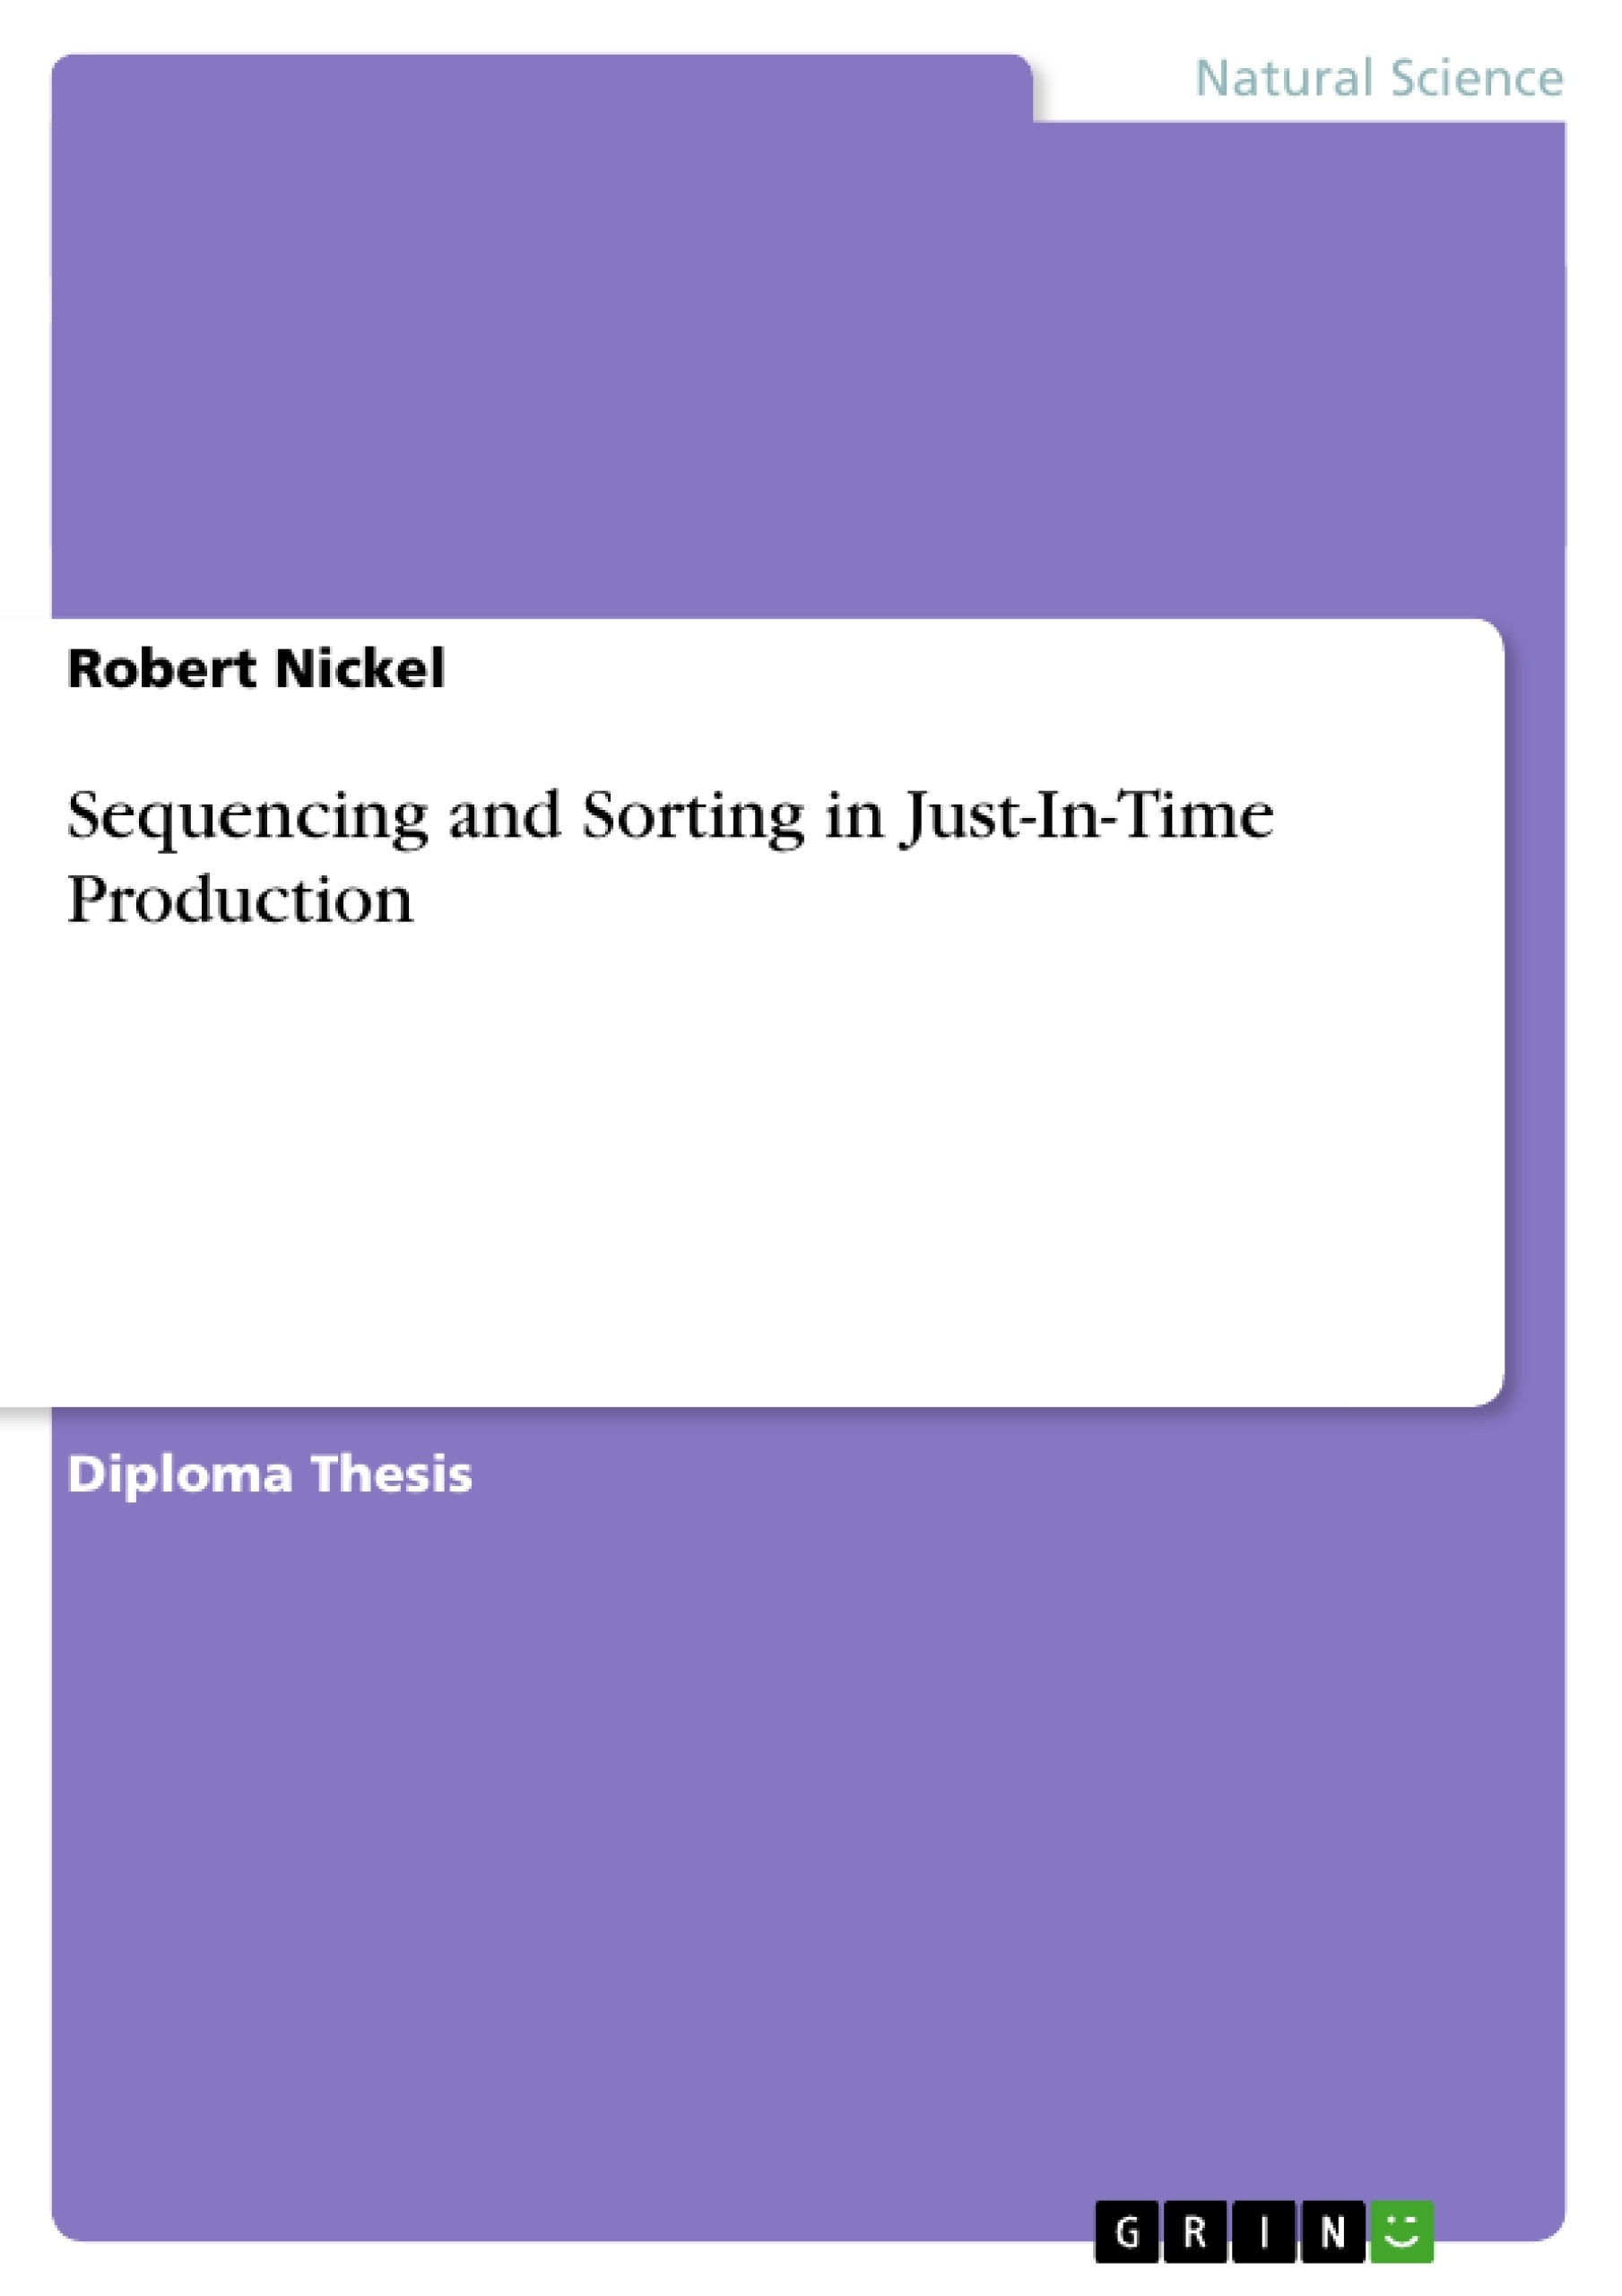 Titre: Sequencing and Sorting in Just-In-Time Production